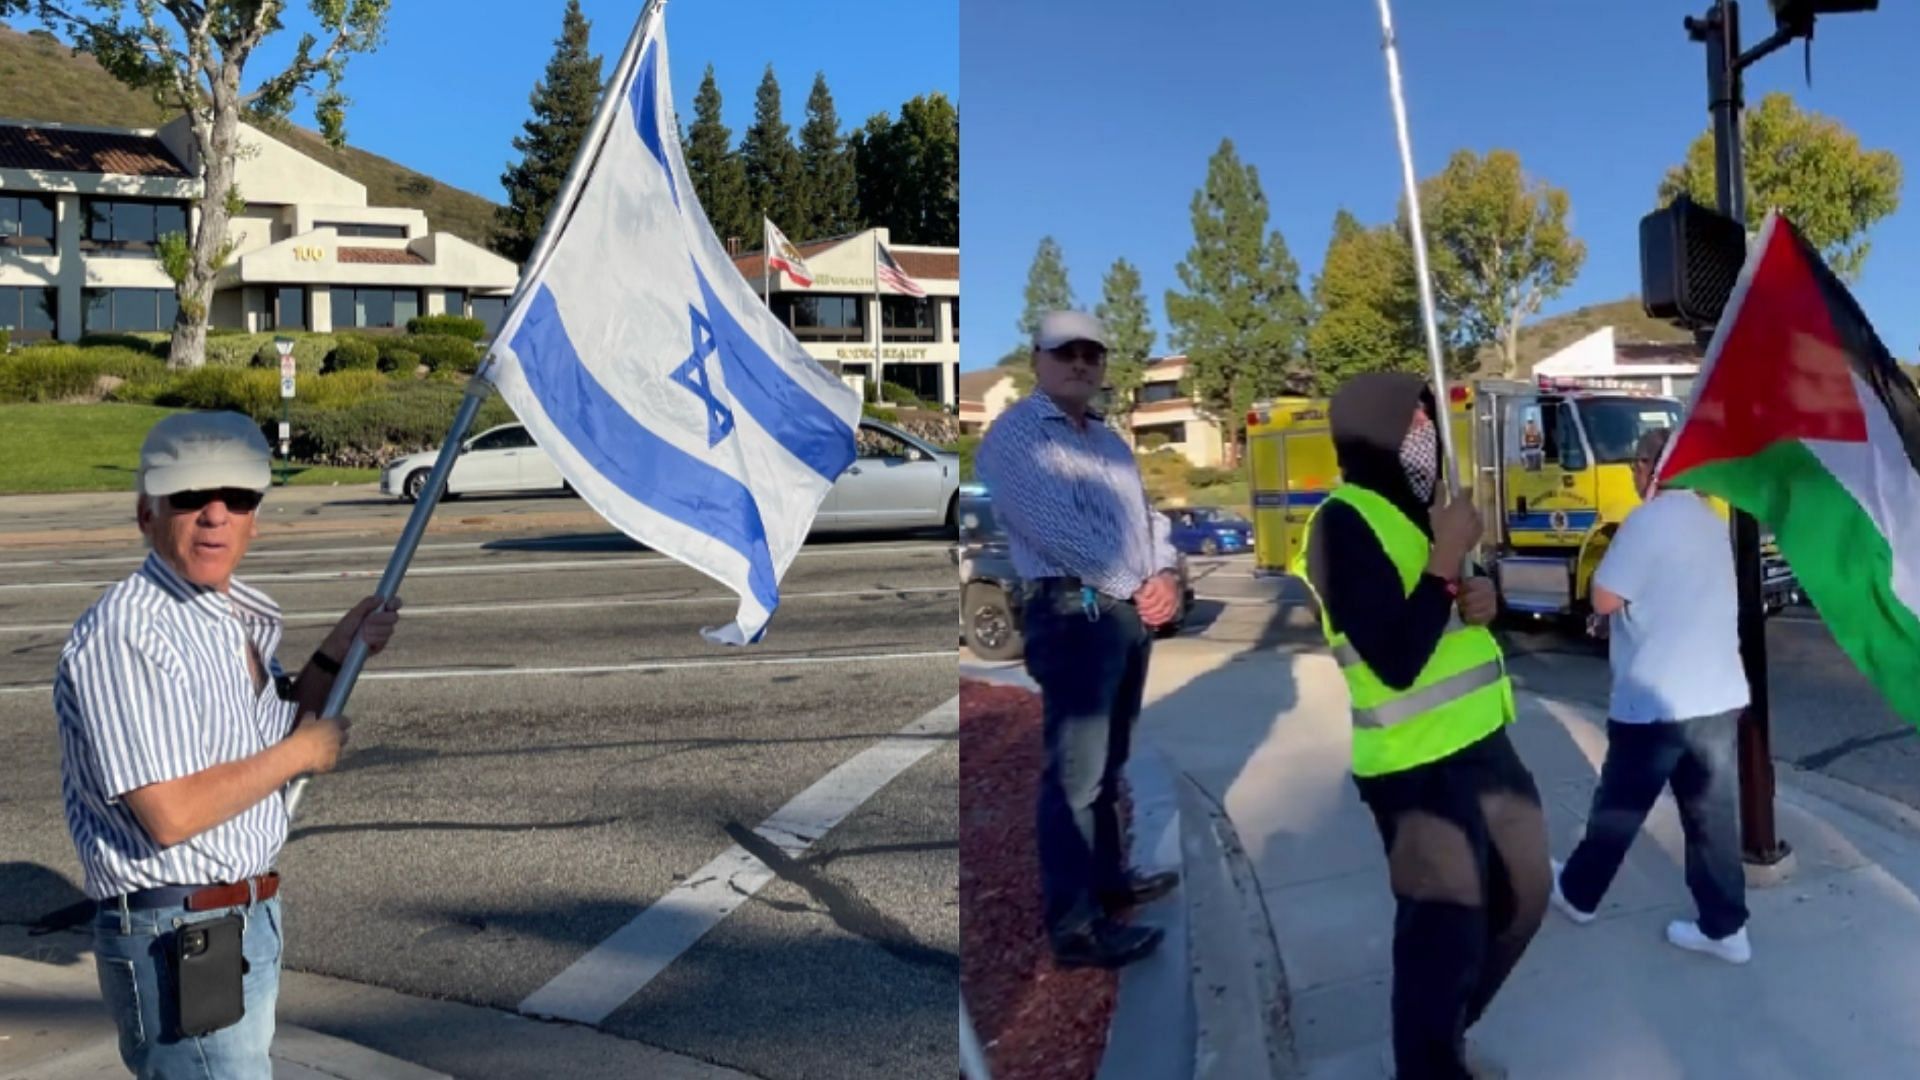 Paul Kessler, a Jew and pro-Israel protester died during a rally in California over the weekend. (Image via X/buttonslives)